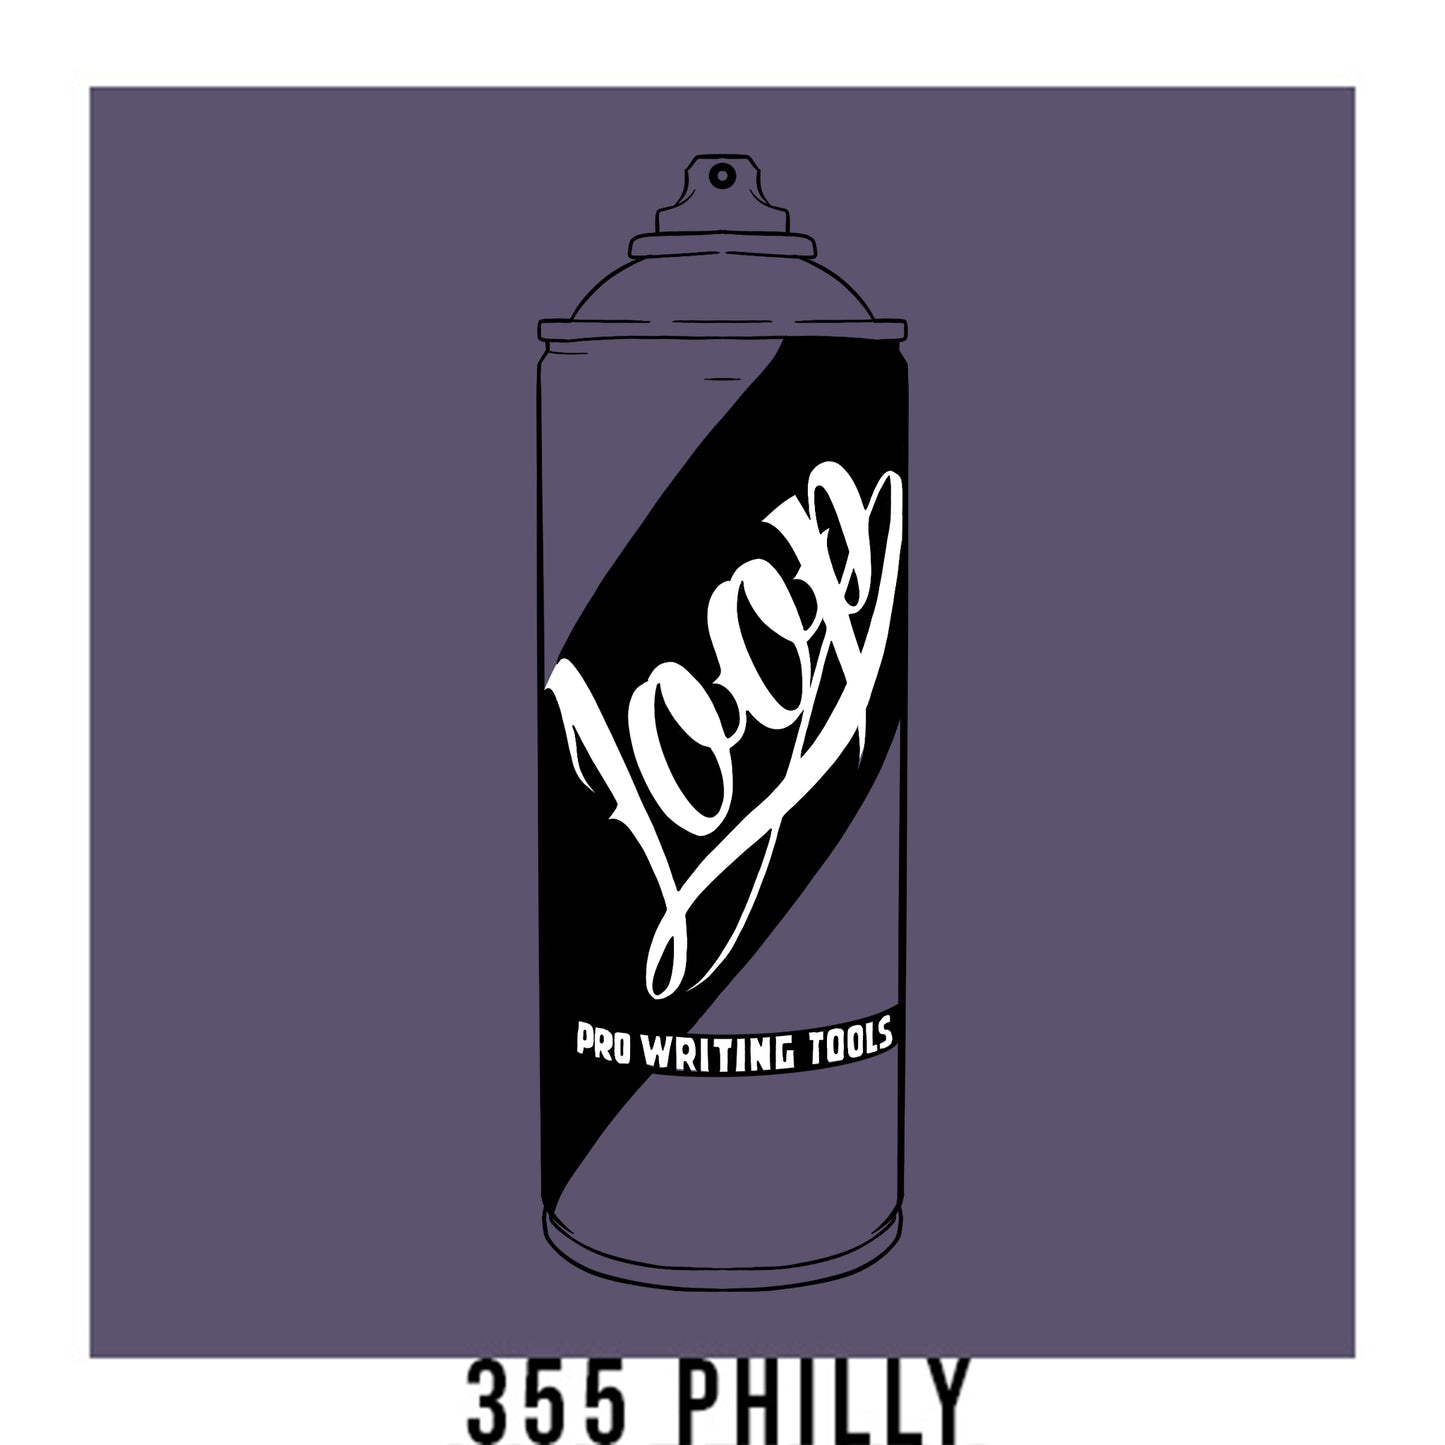 A black outline drawing of a pastel purple spray paint can with the word "Loop" written on the face in script. The background is a color swatch of the same pastel purple with a white border with the words "355 Philly" at the bottom.